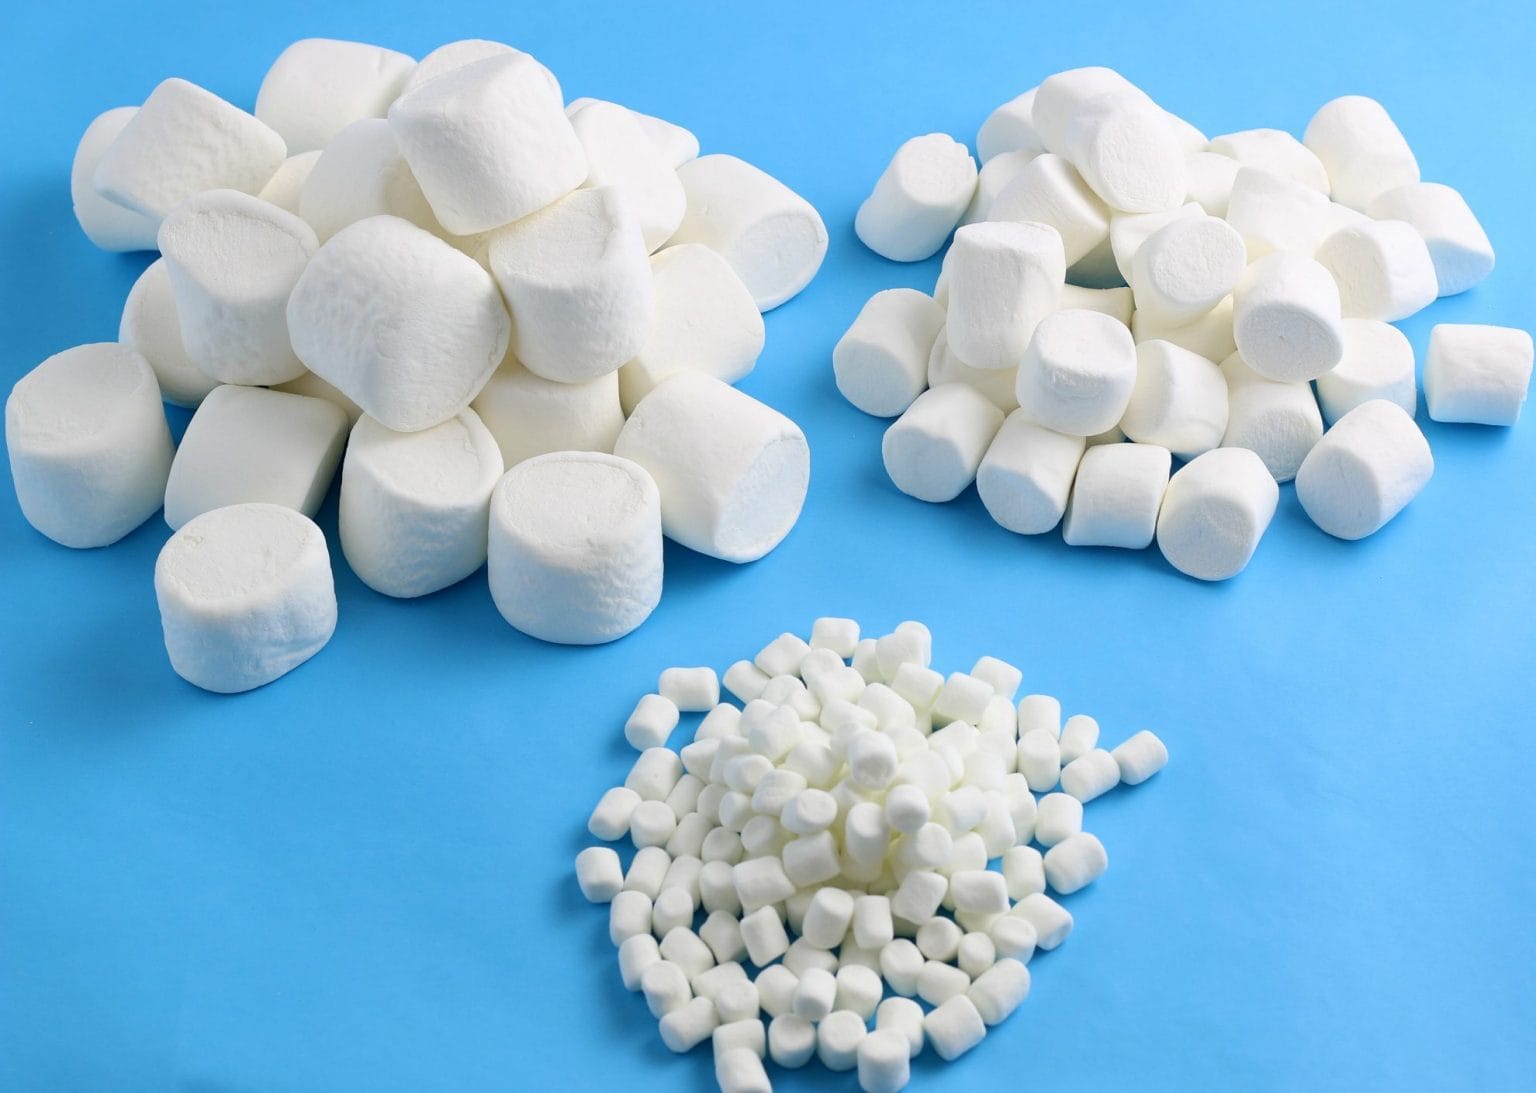 Marshmallow Conversions - How Many Marshmallows in a Cup?